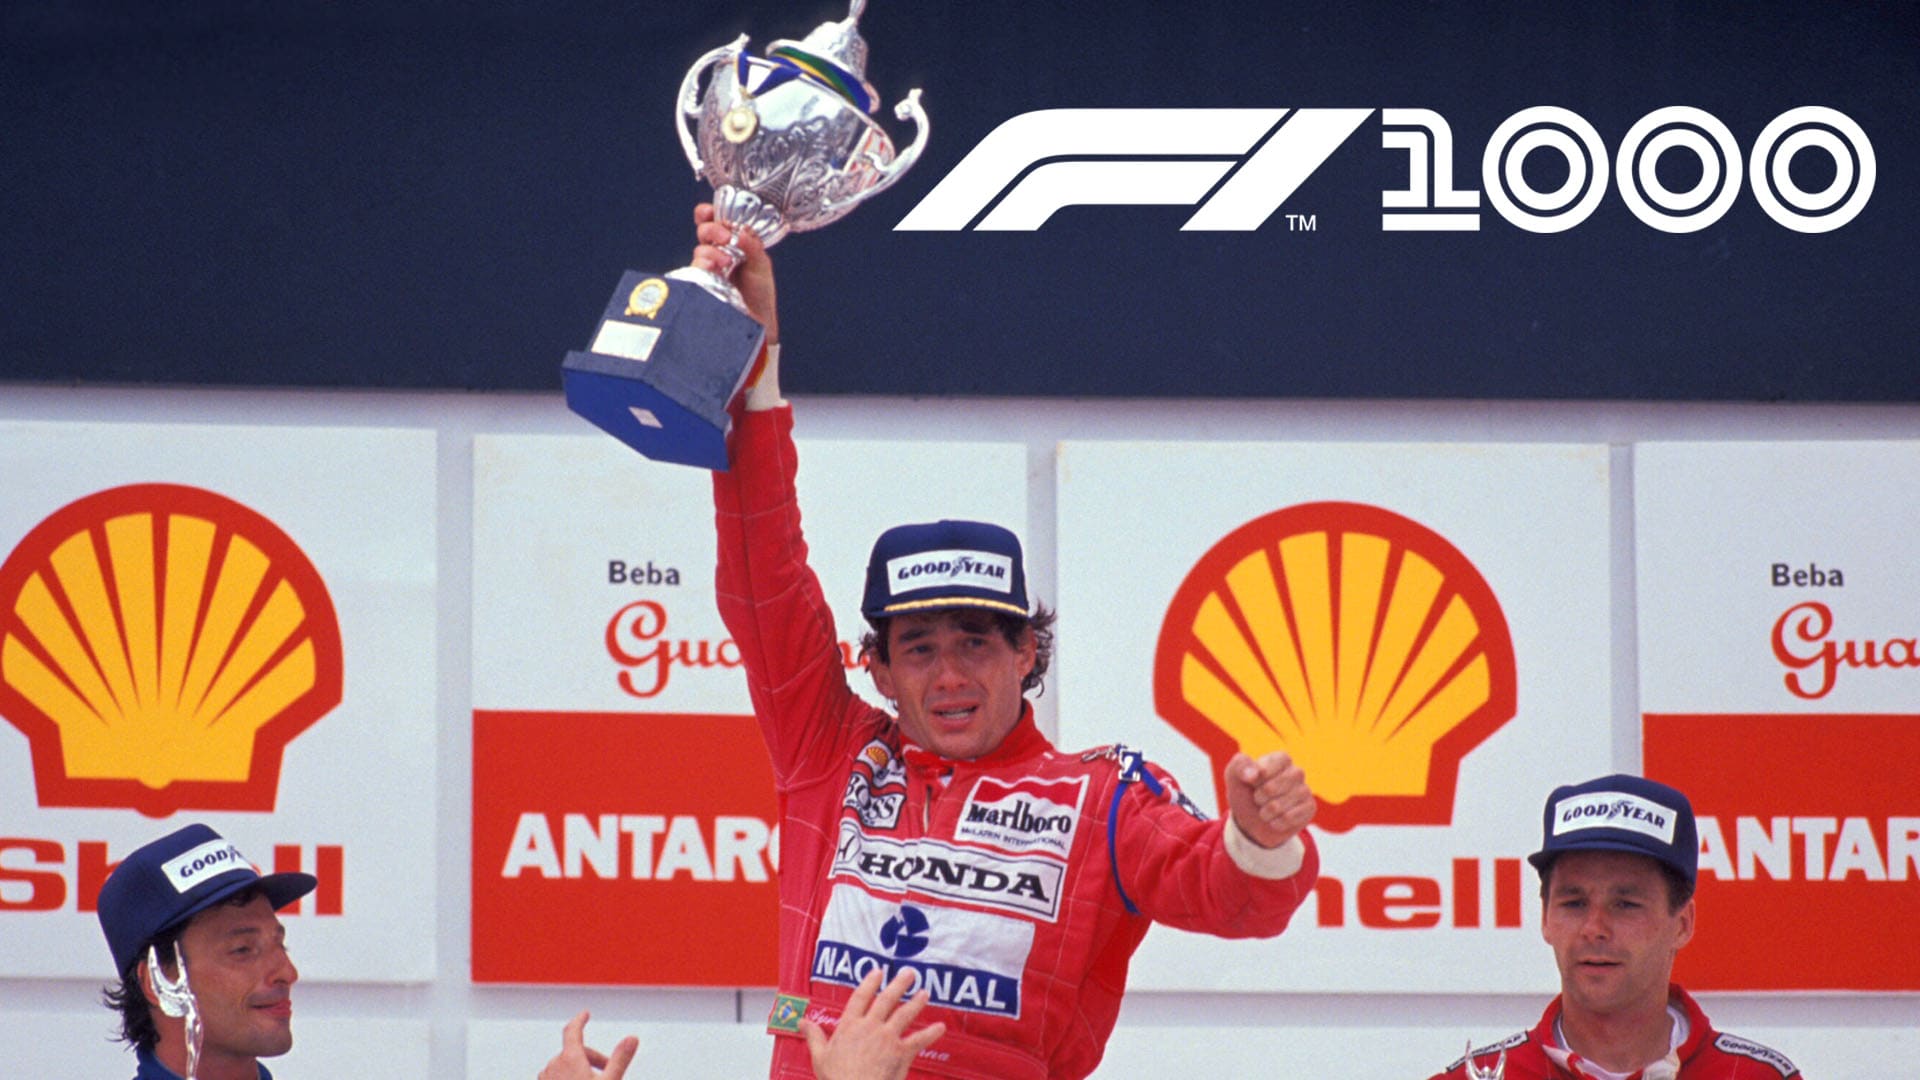 Senna fights through the pain for home glory - F1's Best Drives #4 - VIDEO  | Formula 1®